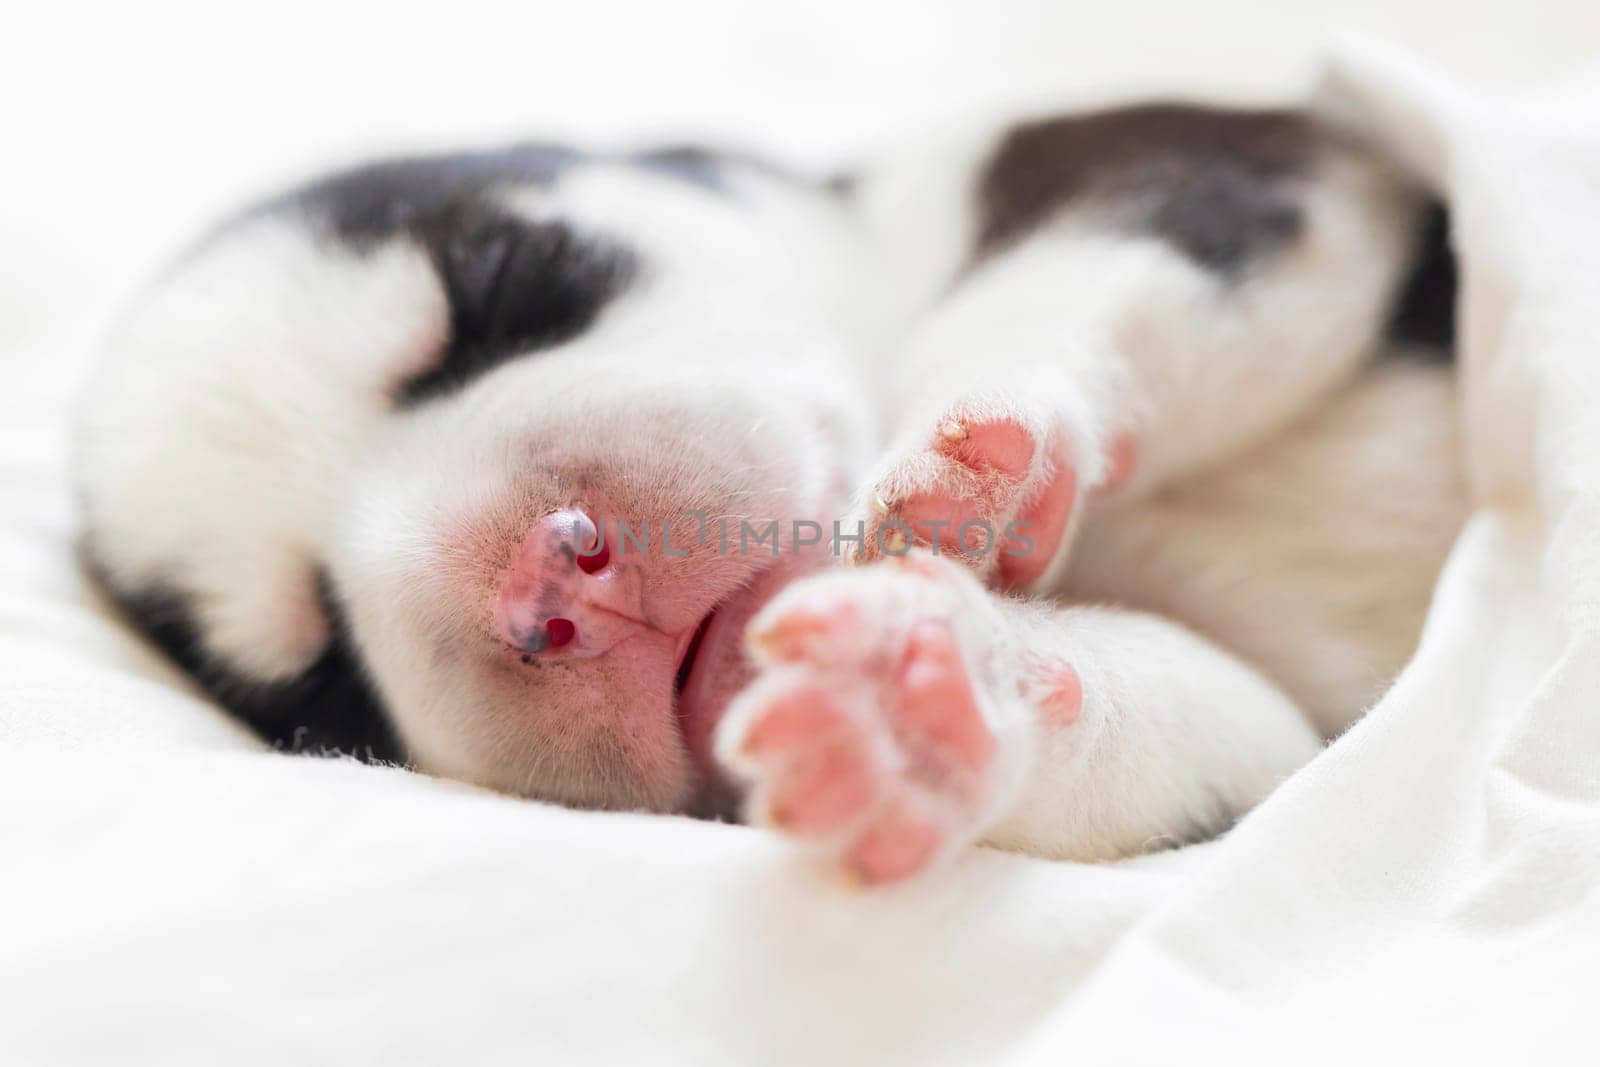 Newborn husky puppy asleep on white soft bedding. Close-up shot for design and print in pet care and nursery.